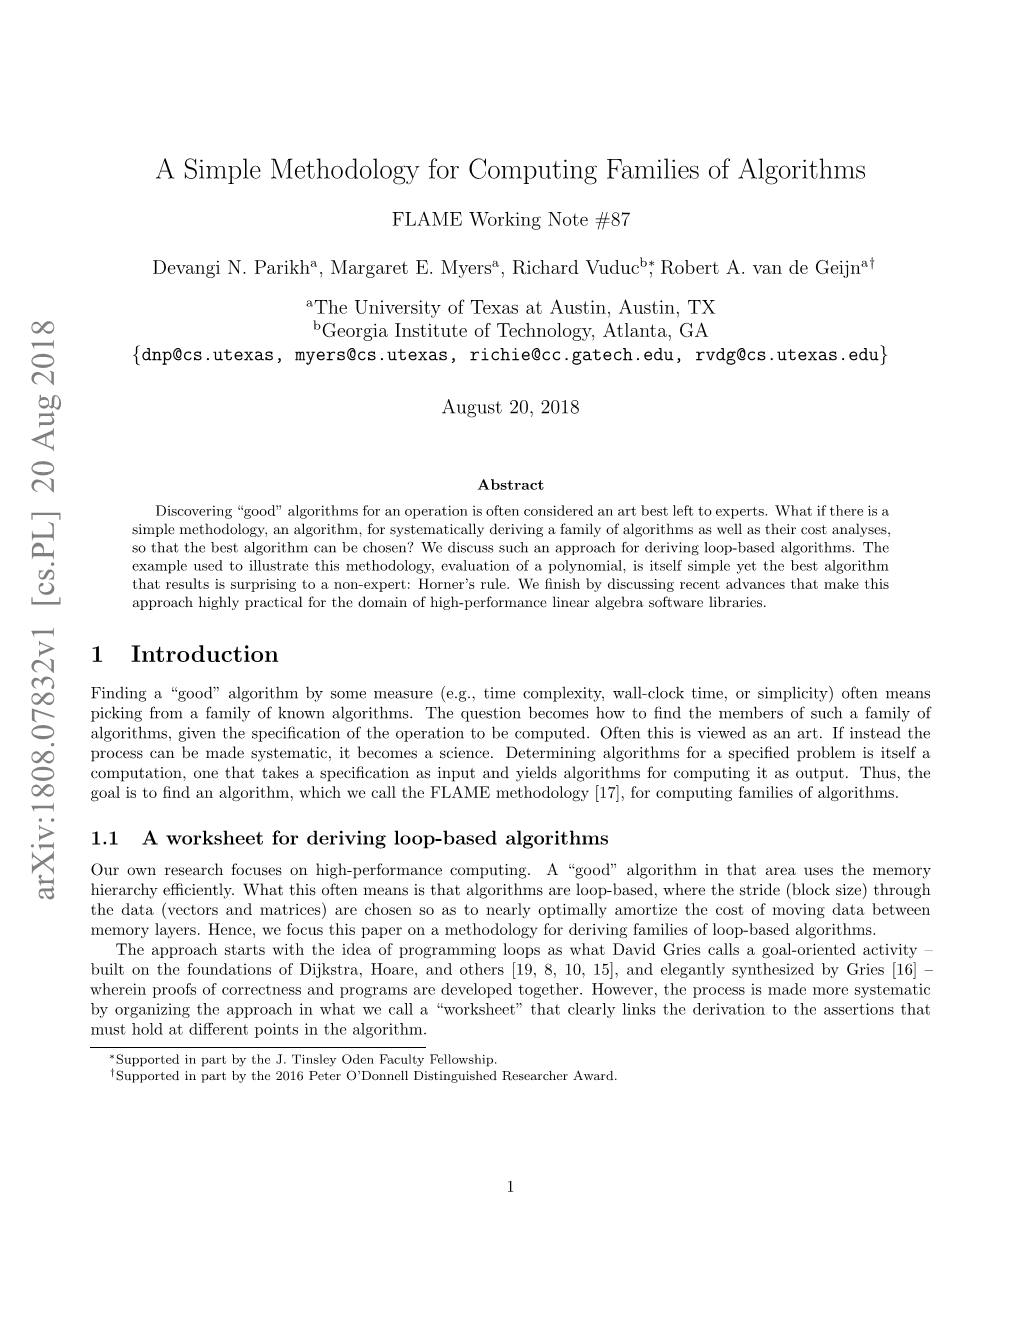 A Simple Methodology for Computing Families of Algorithms